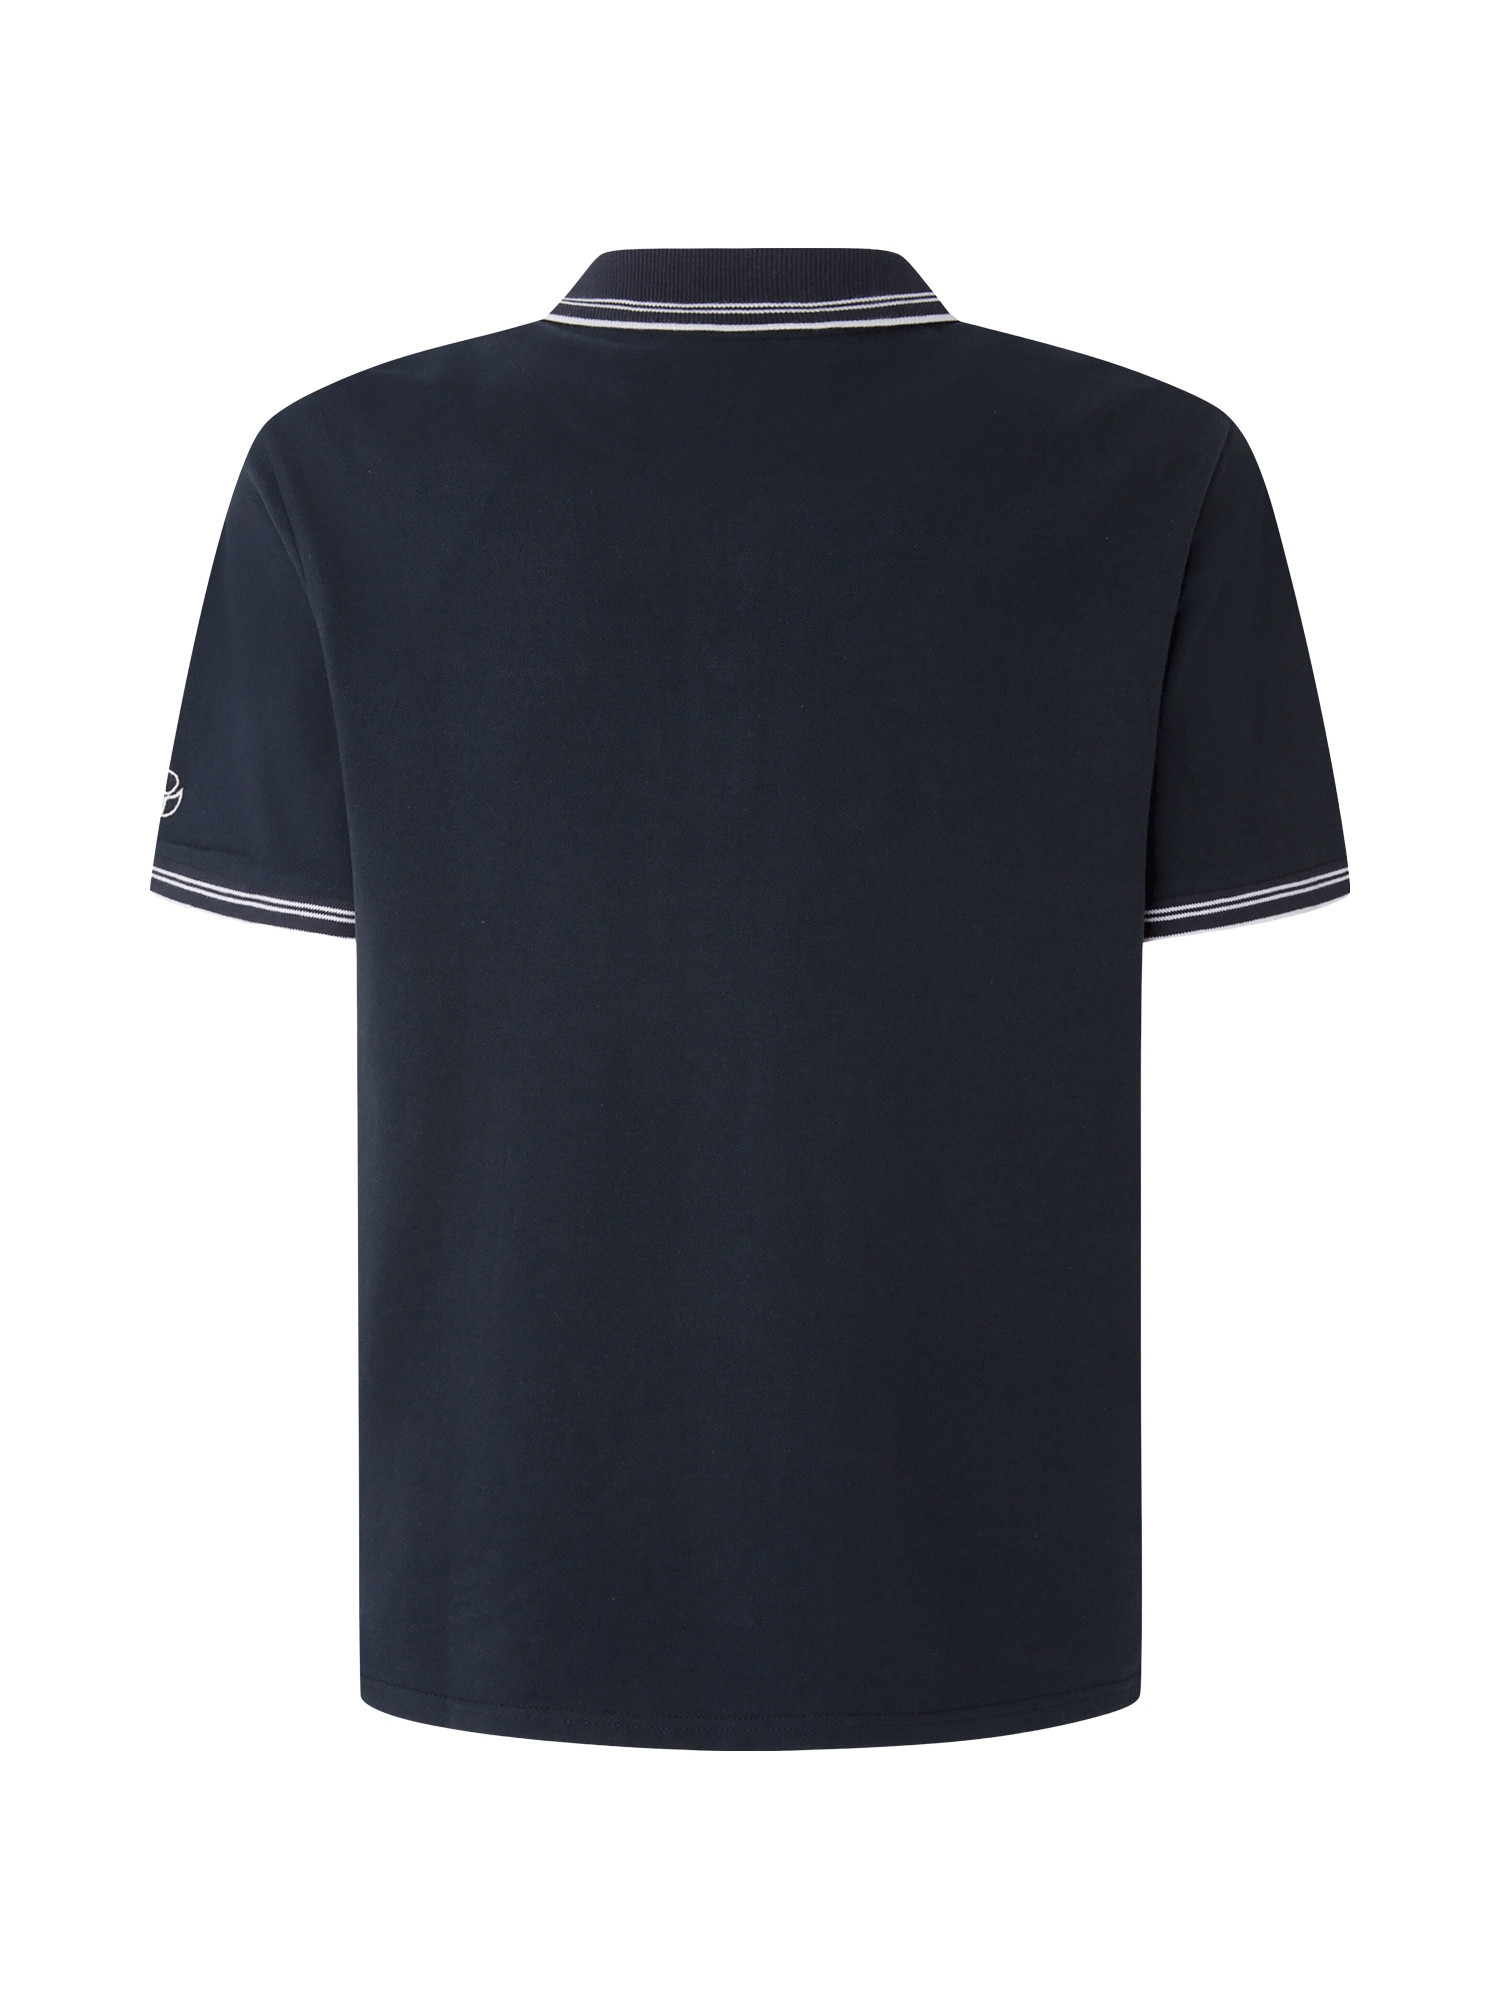 Pepe Jeans - Polo con logo in cotone, Blu scuro, large image number 1